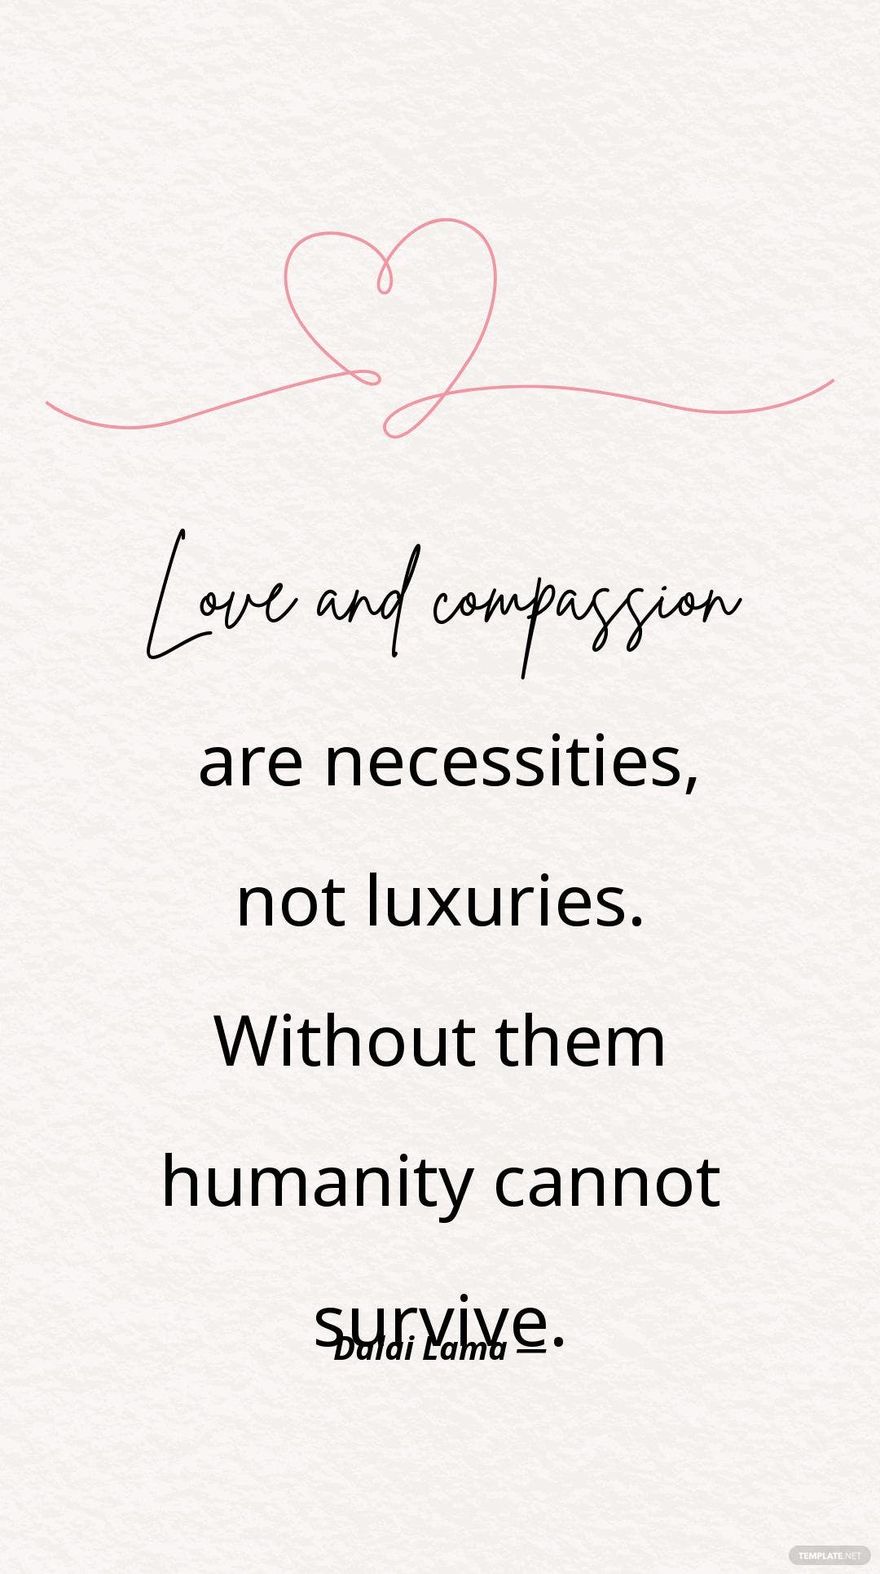 Dalai Lama — Love and compassion are necessities, not luxuries. Without them humanity cannot survive.